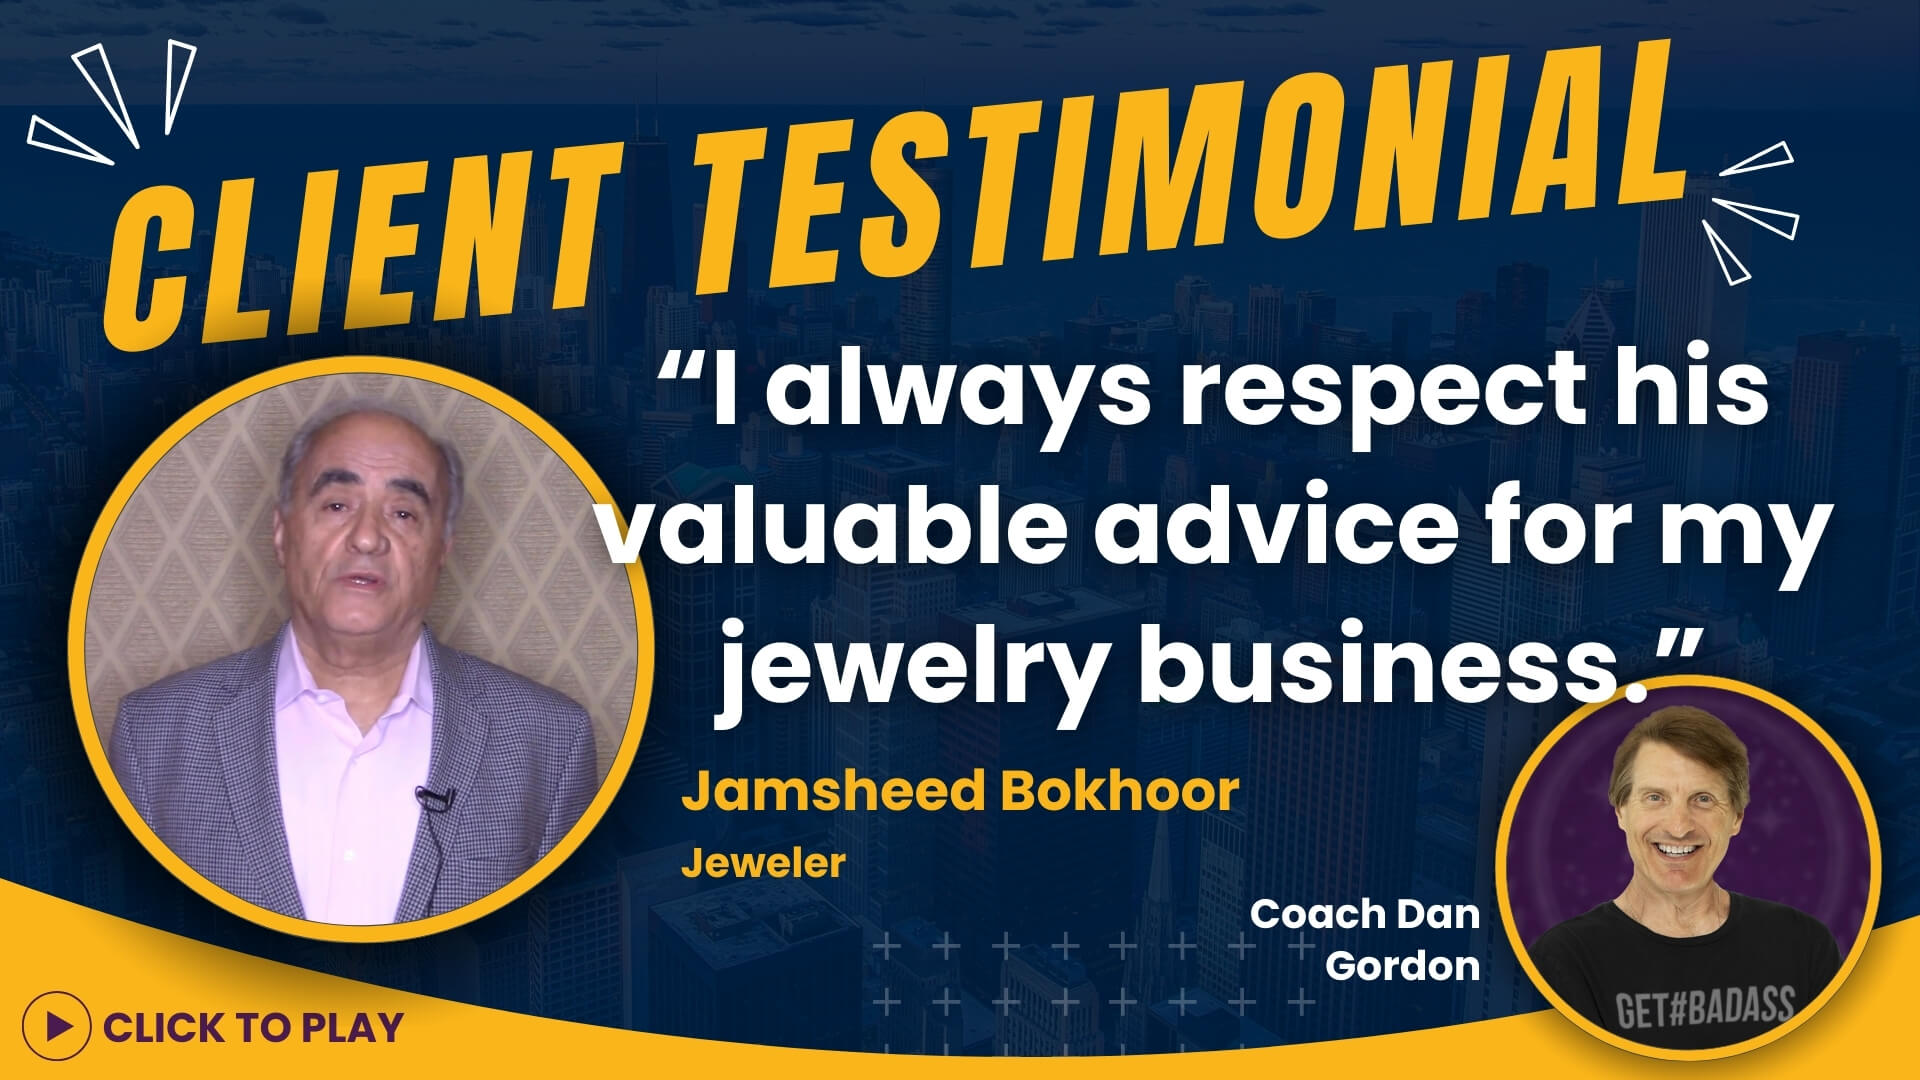 Jamsheed Bokhoor, a jeweler, appears in professional attire to give his testimony on Coach Dan Gordon's valuable business advice.